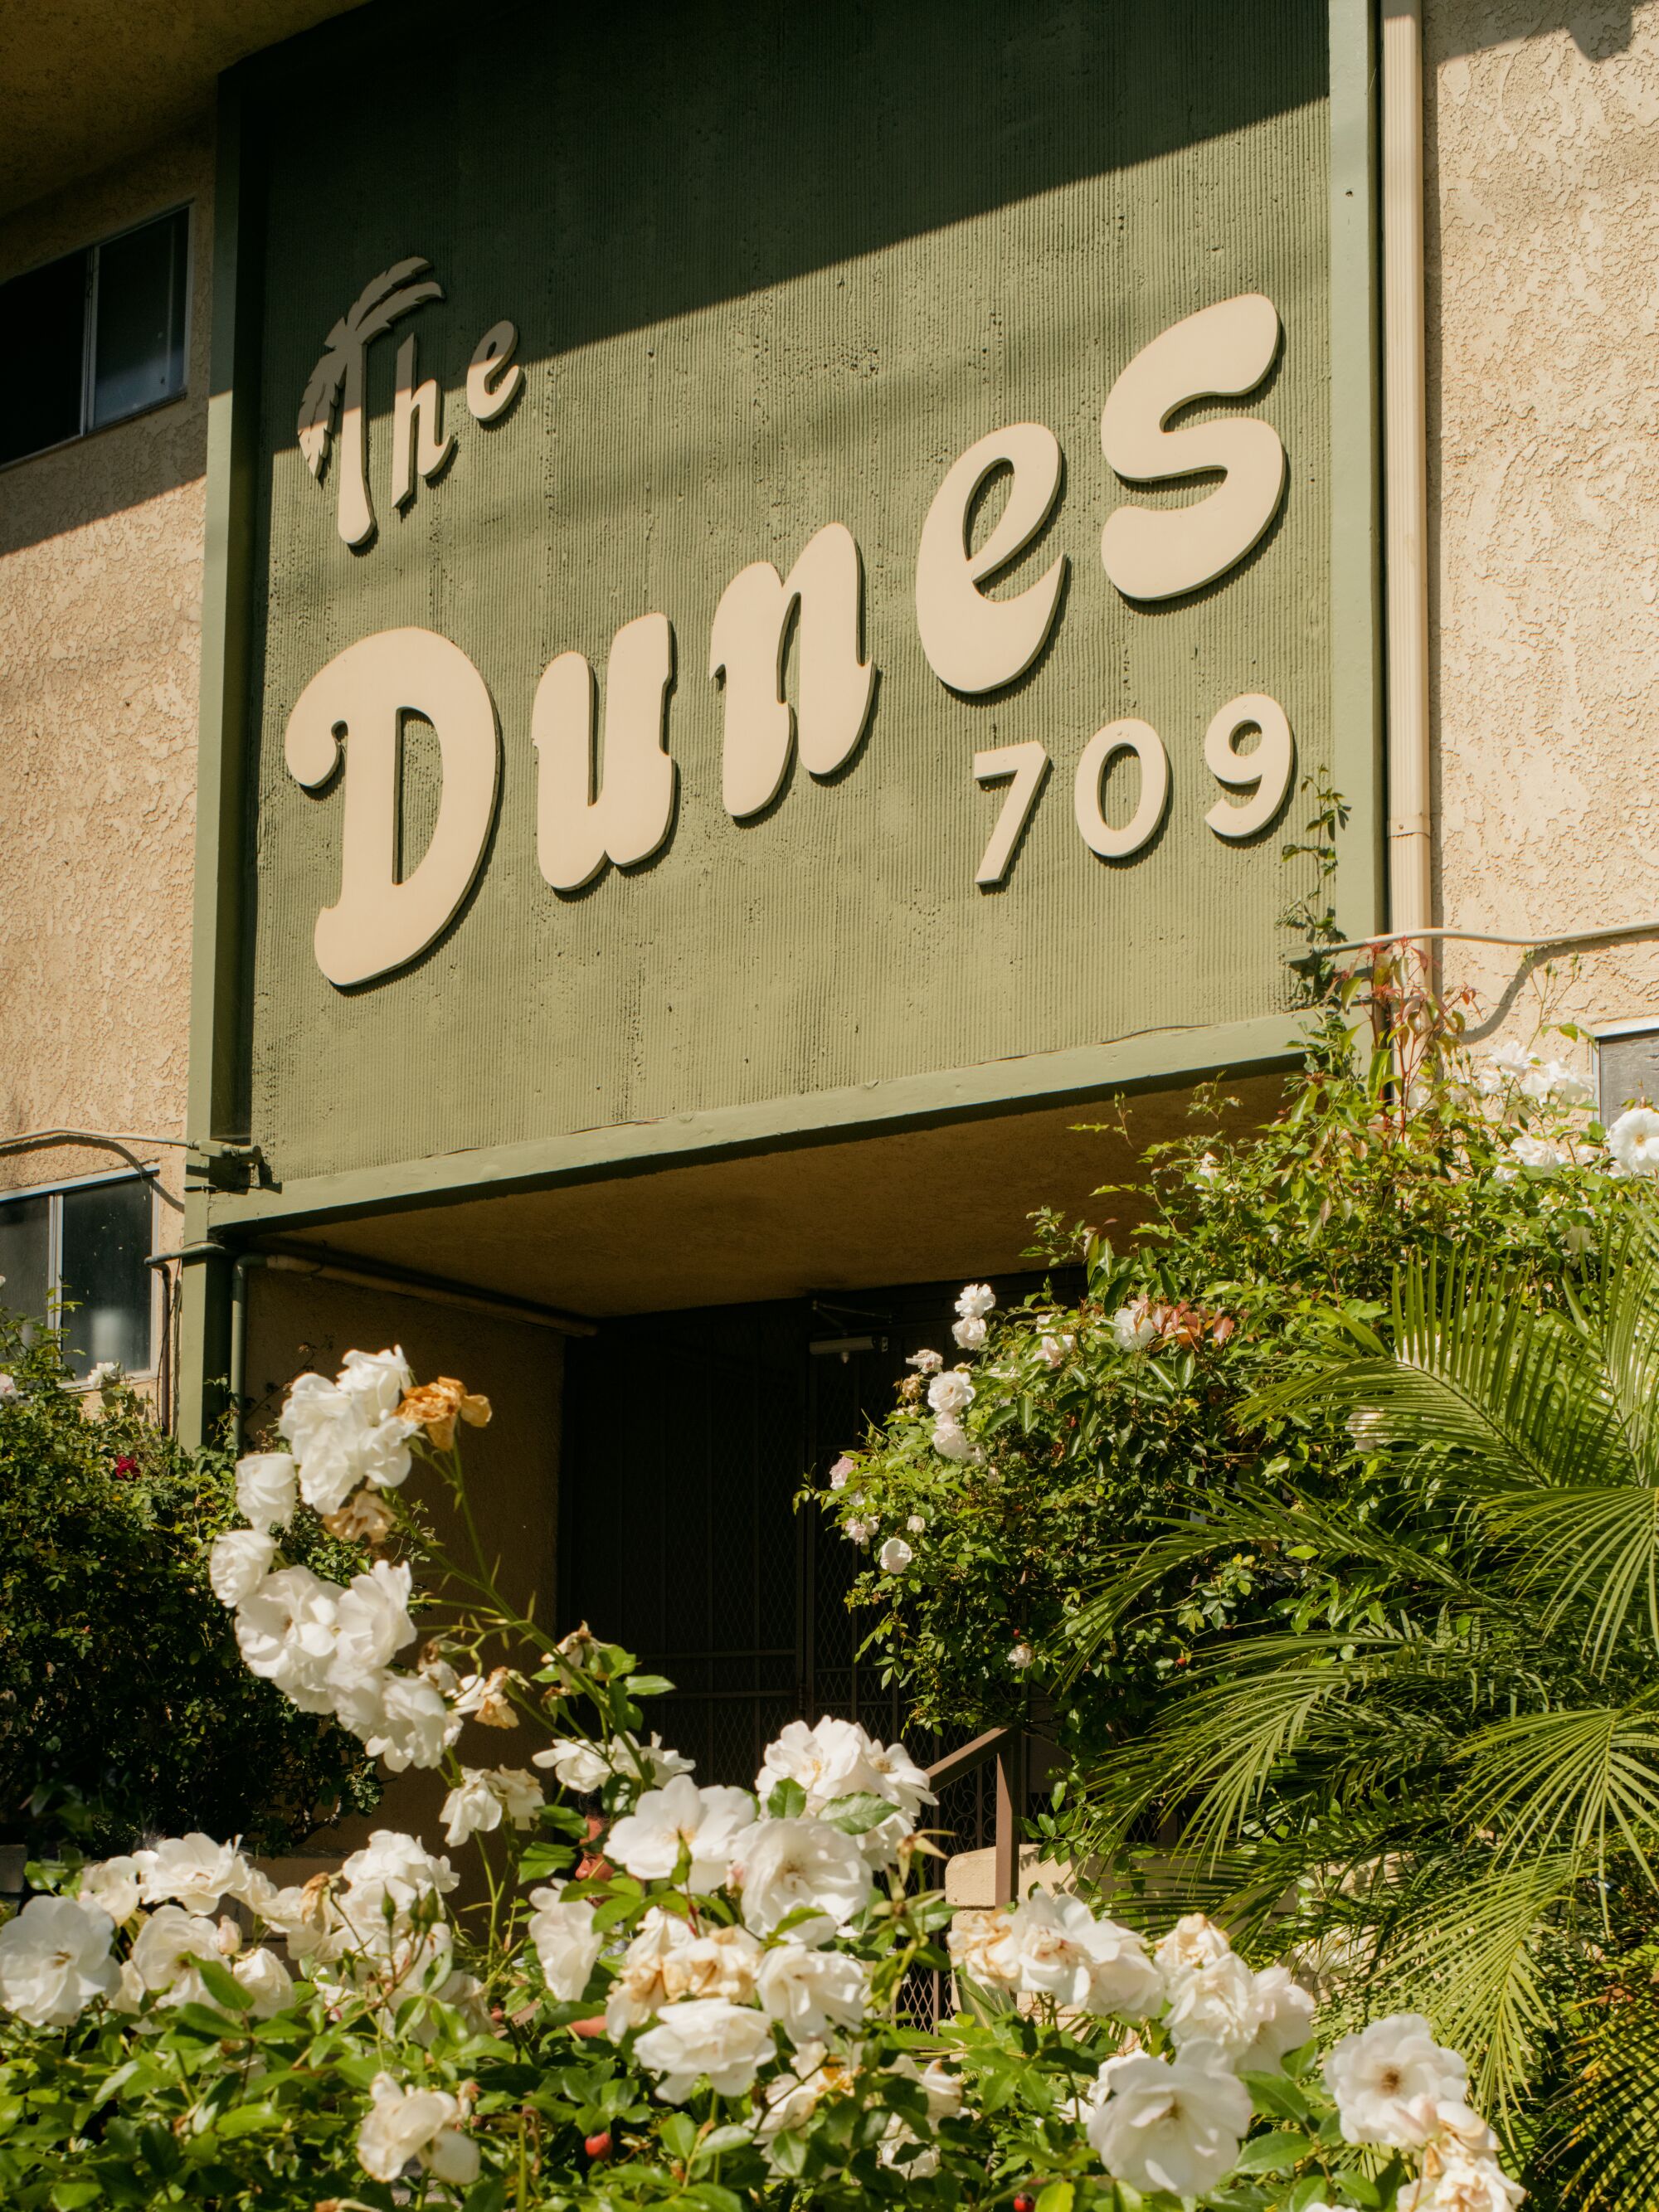 Apartment building sign that reads “The Dunes 709.”